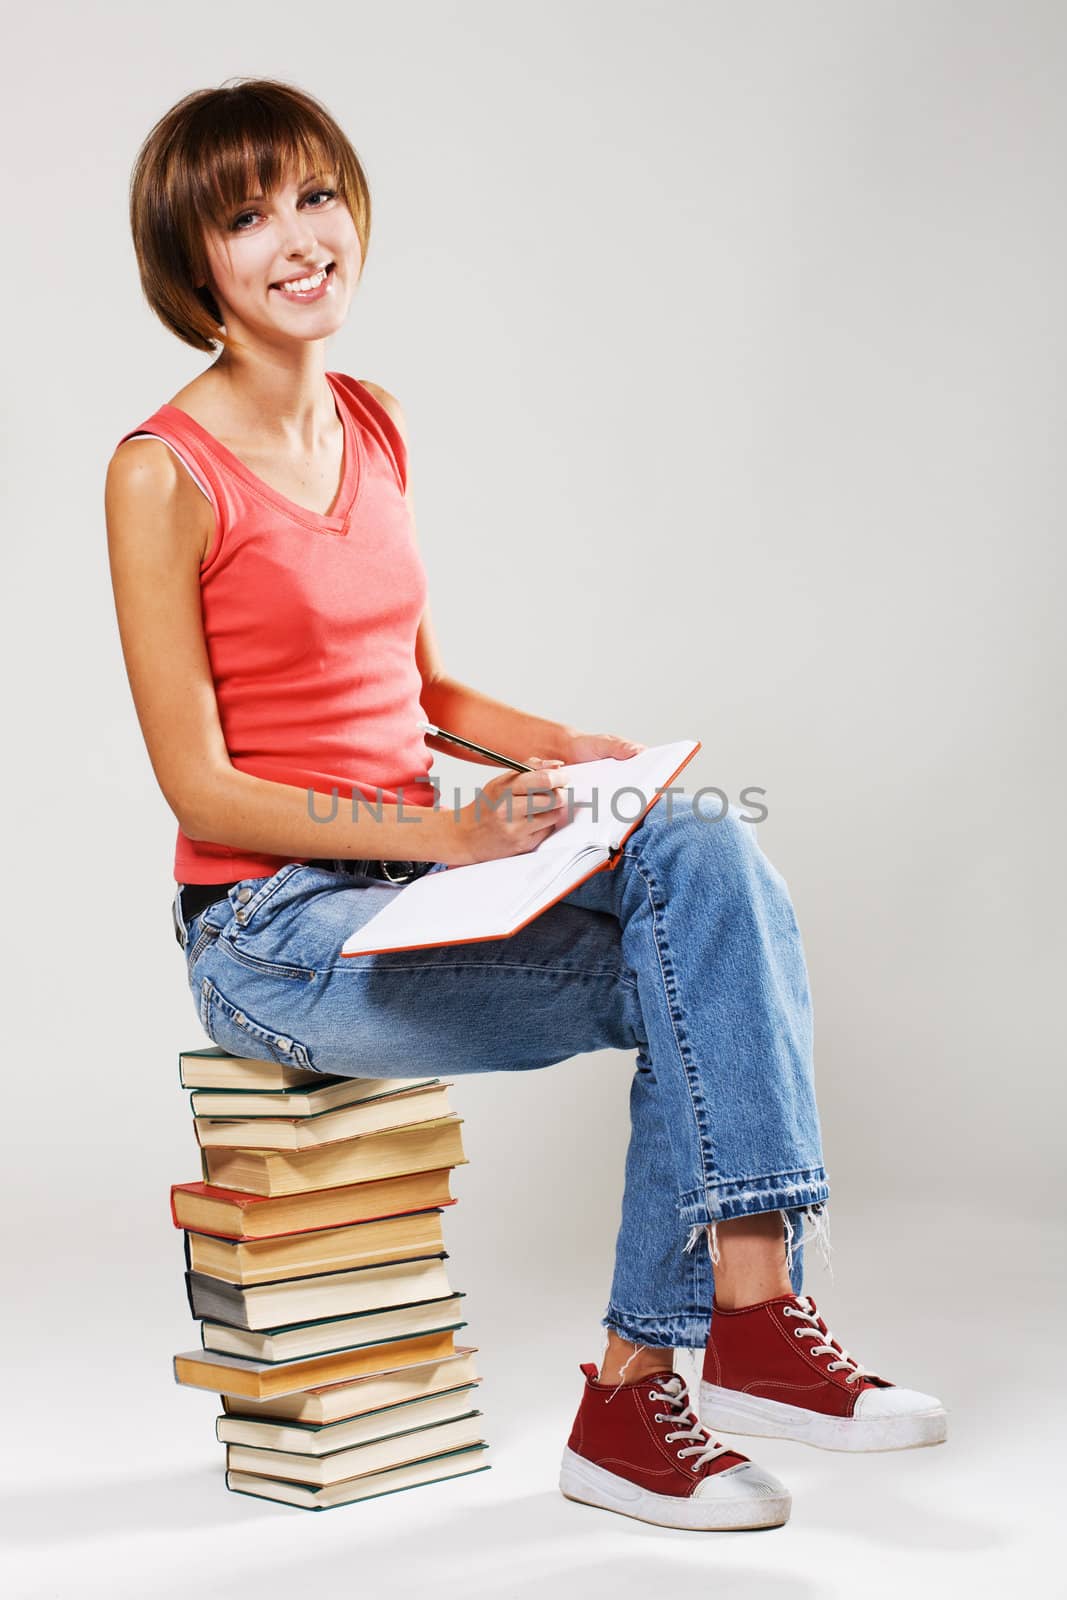 Lovely student sitting on a stack of books, gray background